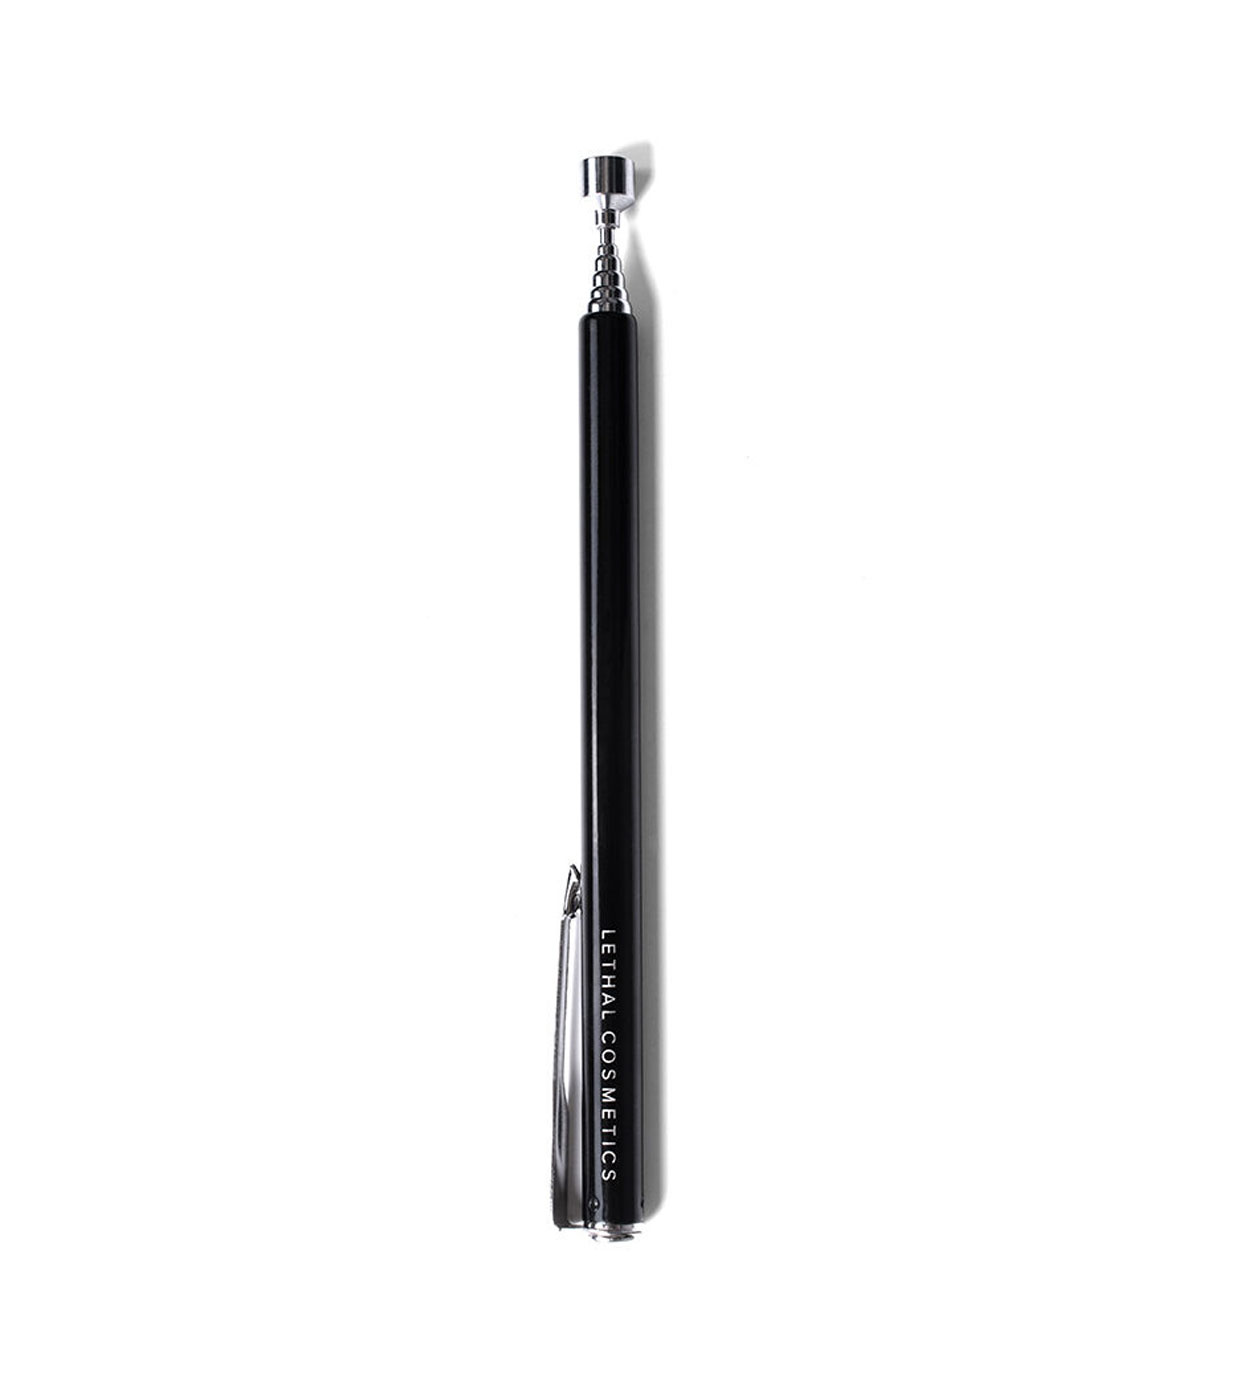 Acquistare Lethal Cosmetics - Penna ombretto magnetica Magnet Wand